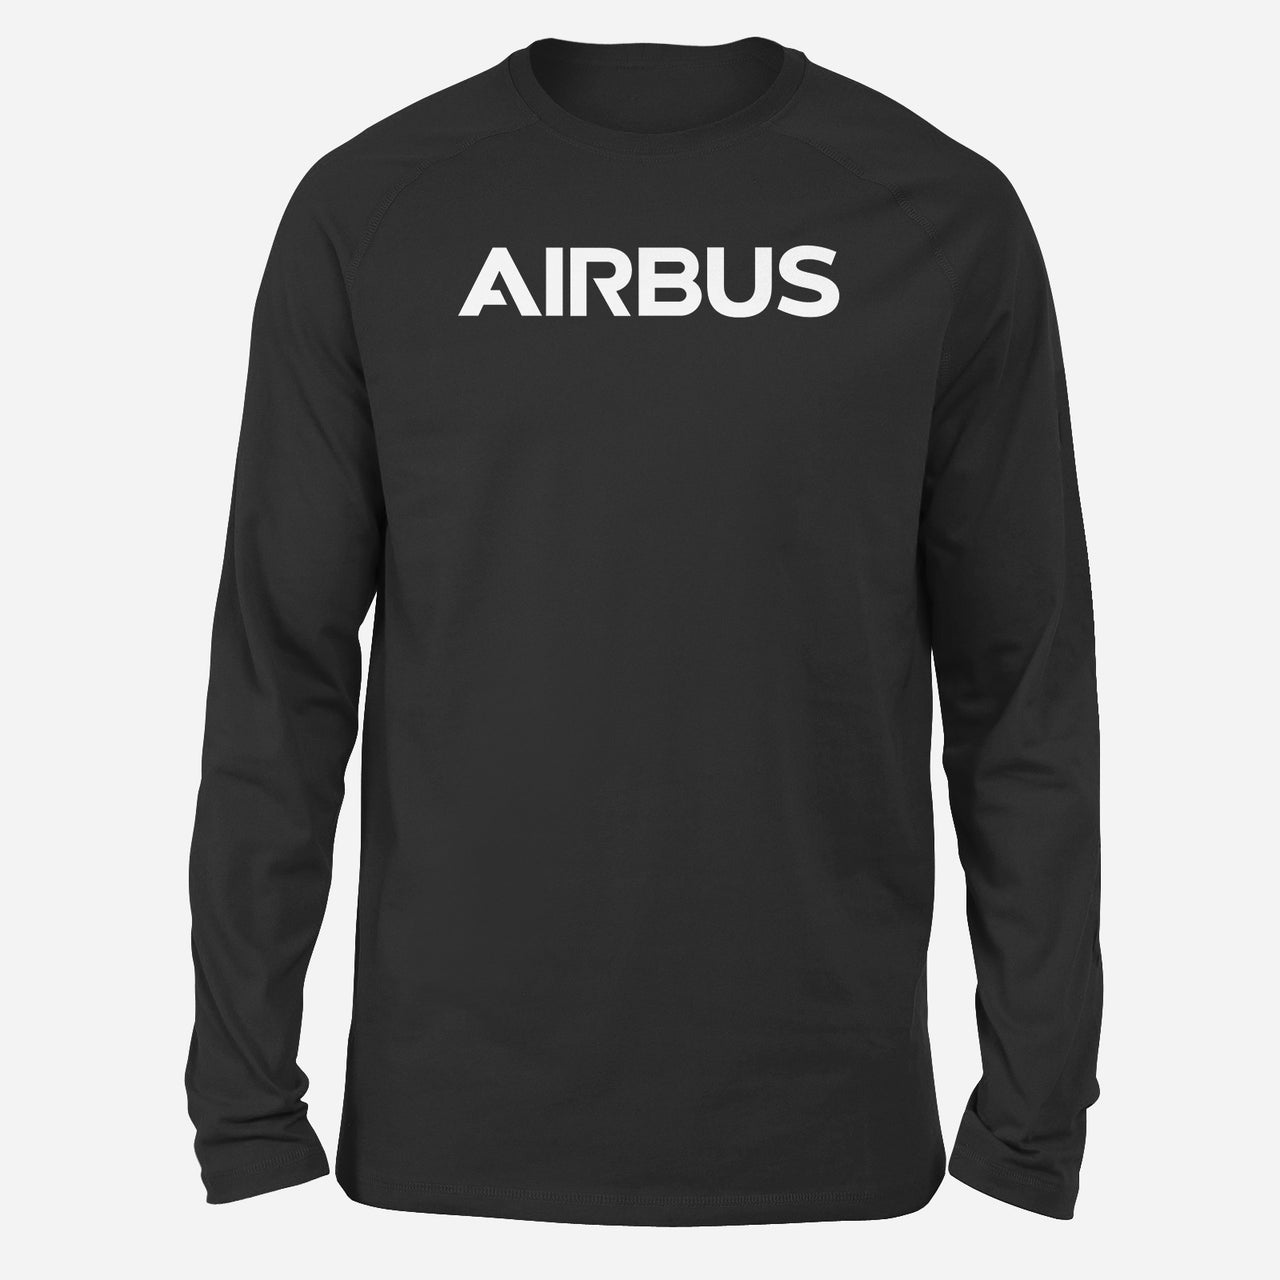 Airbus & Text Designed Long-Sleeve T-Shirts